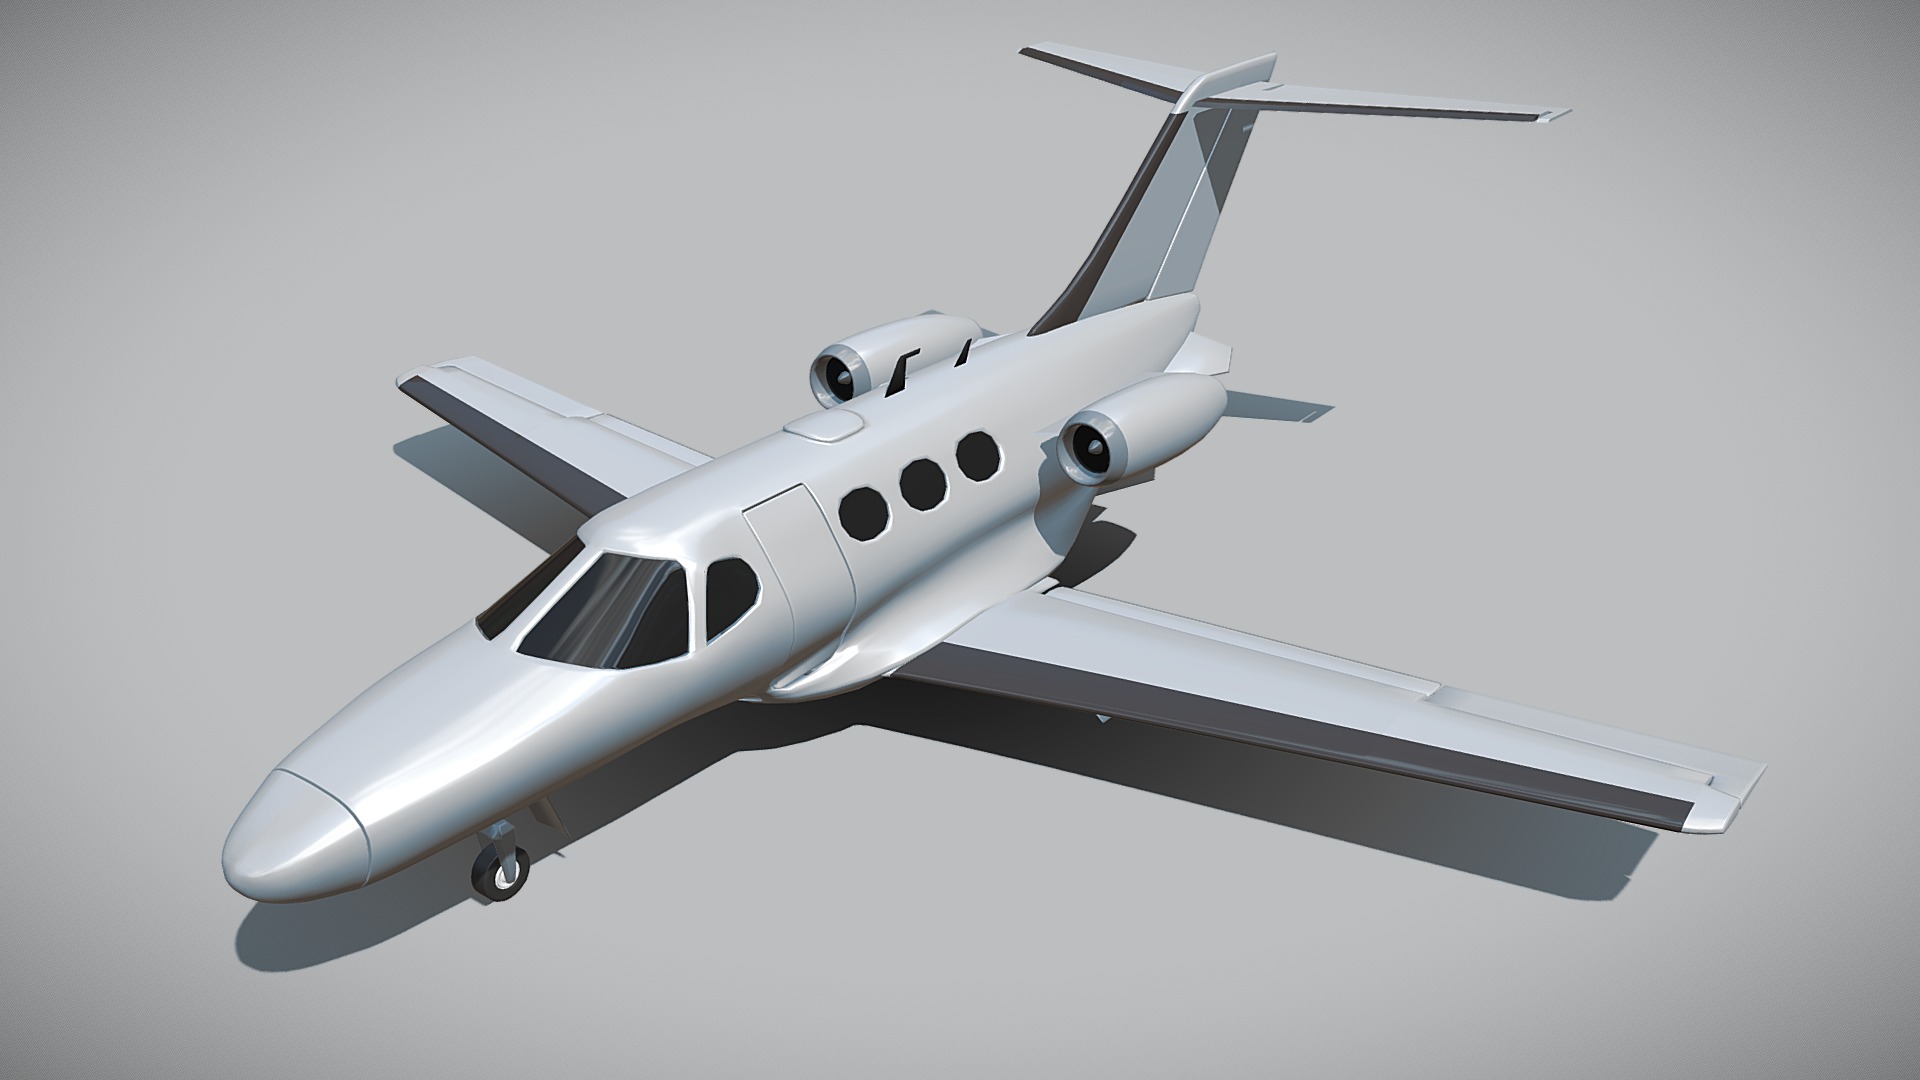 3D model Cessna Mustang private jet - This is a 3D model of the Cessna Mustang private jet. The 3D model is about a white airplane with a black nose.